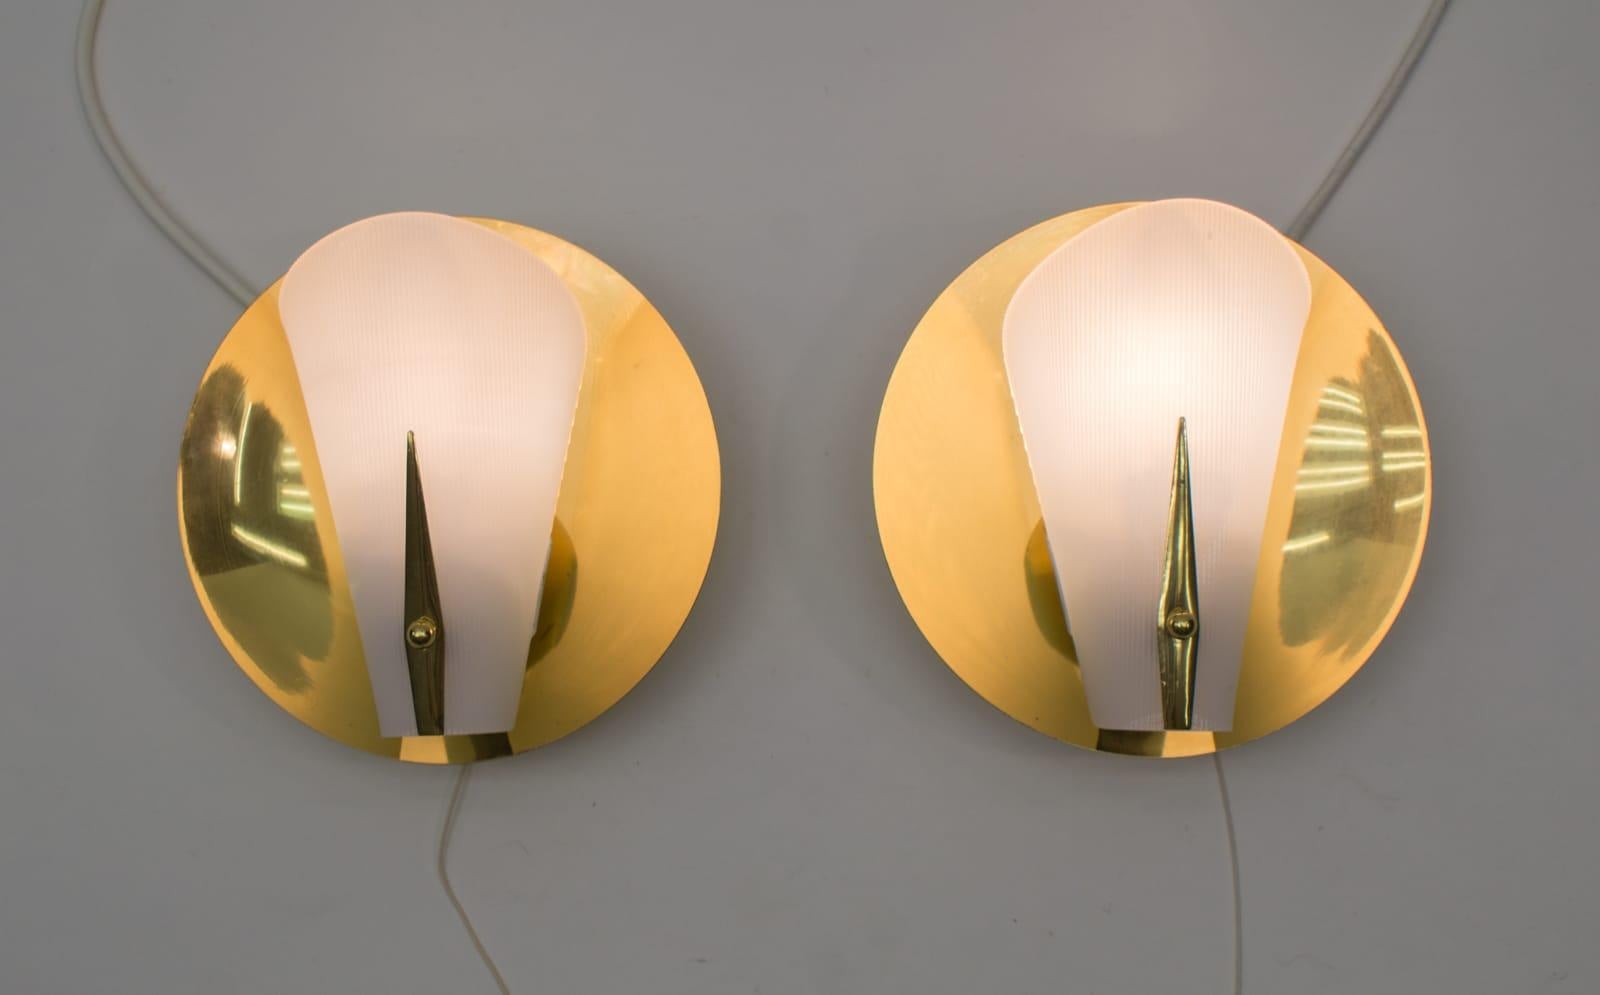 German Set of Two Mid-Century Modern Brass Wall Lamps or Sconces, 1950s For Sale